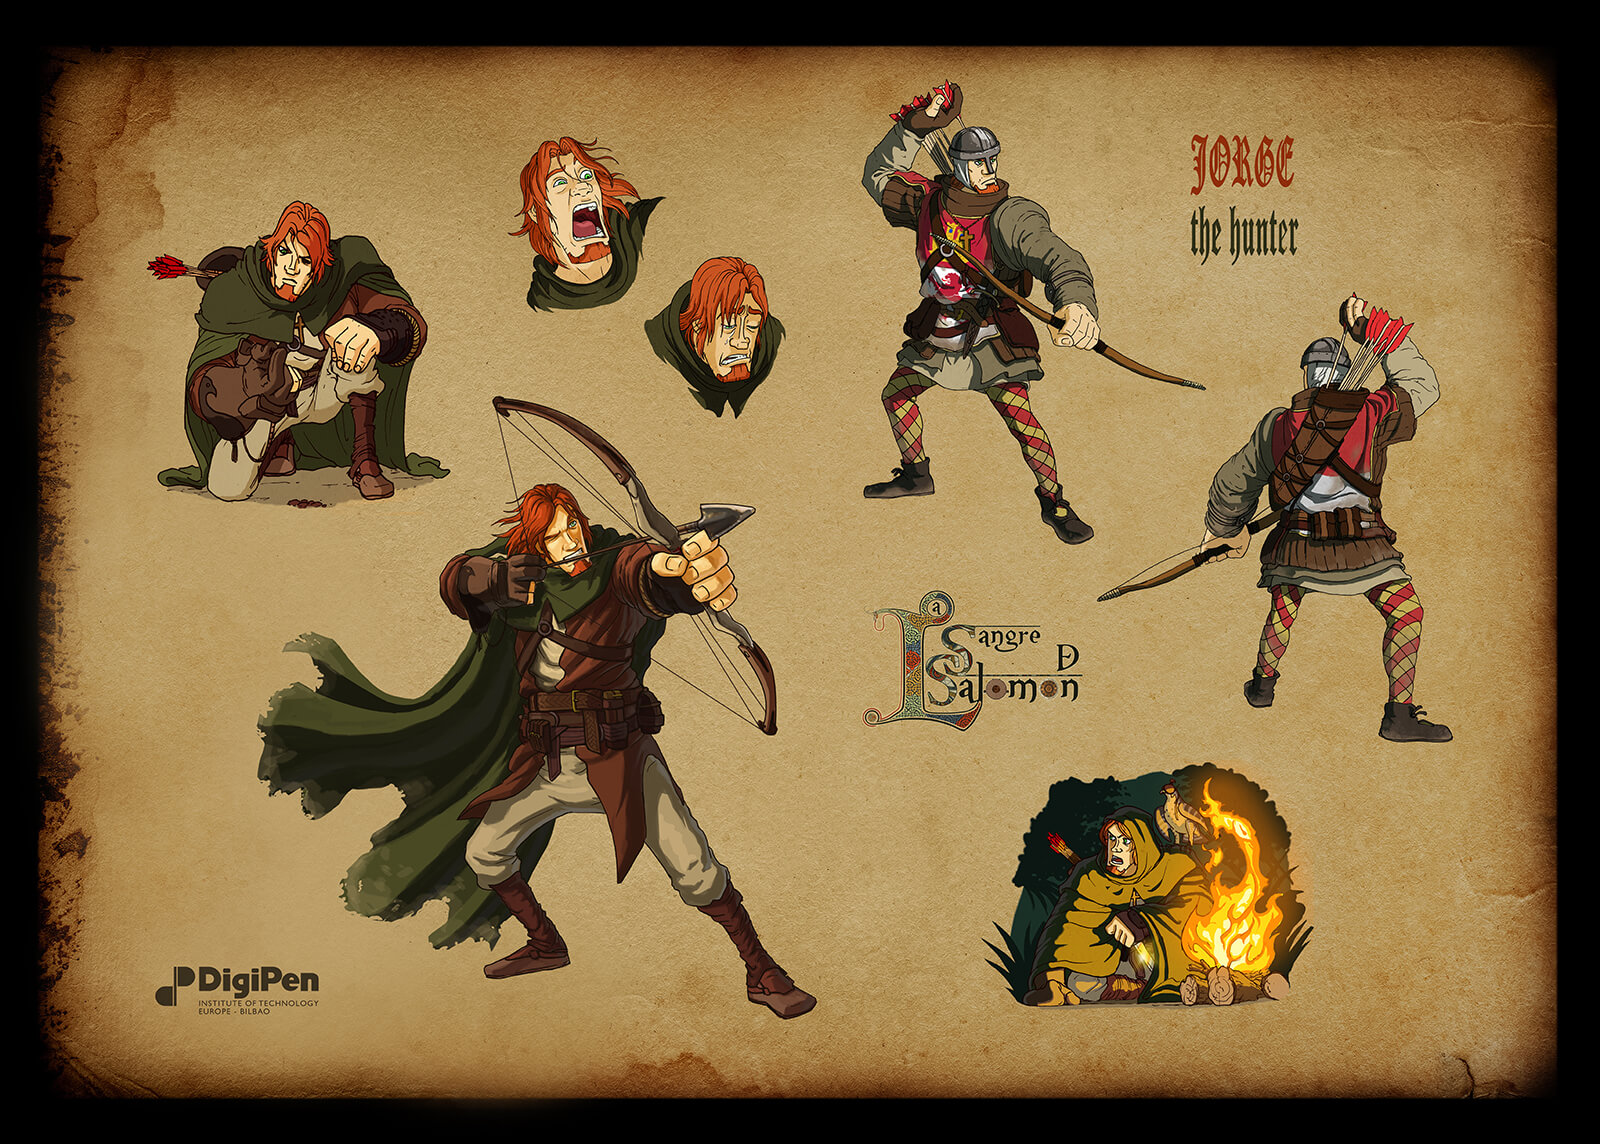 Concept paintings for a red-haired hunter in Sangre de Salomon in various poses, aiming a bow and arrow and crouching